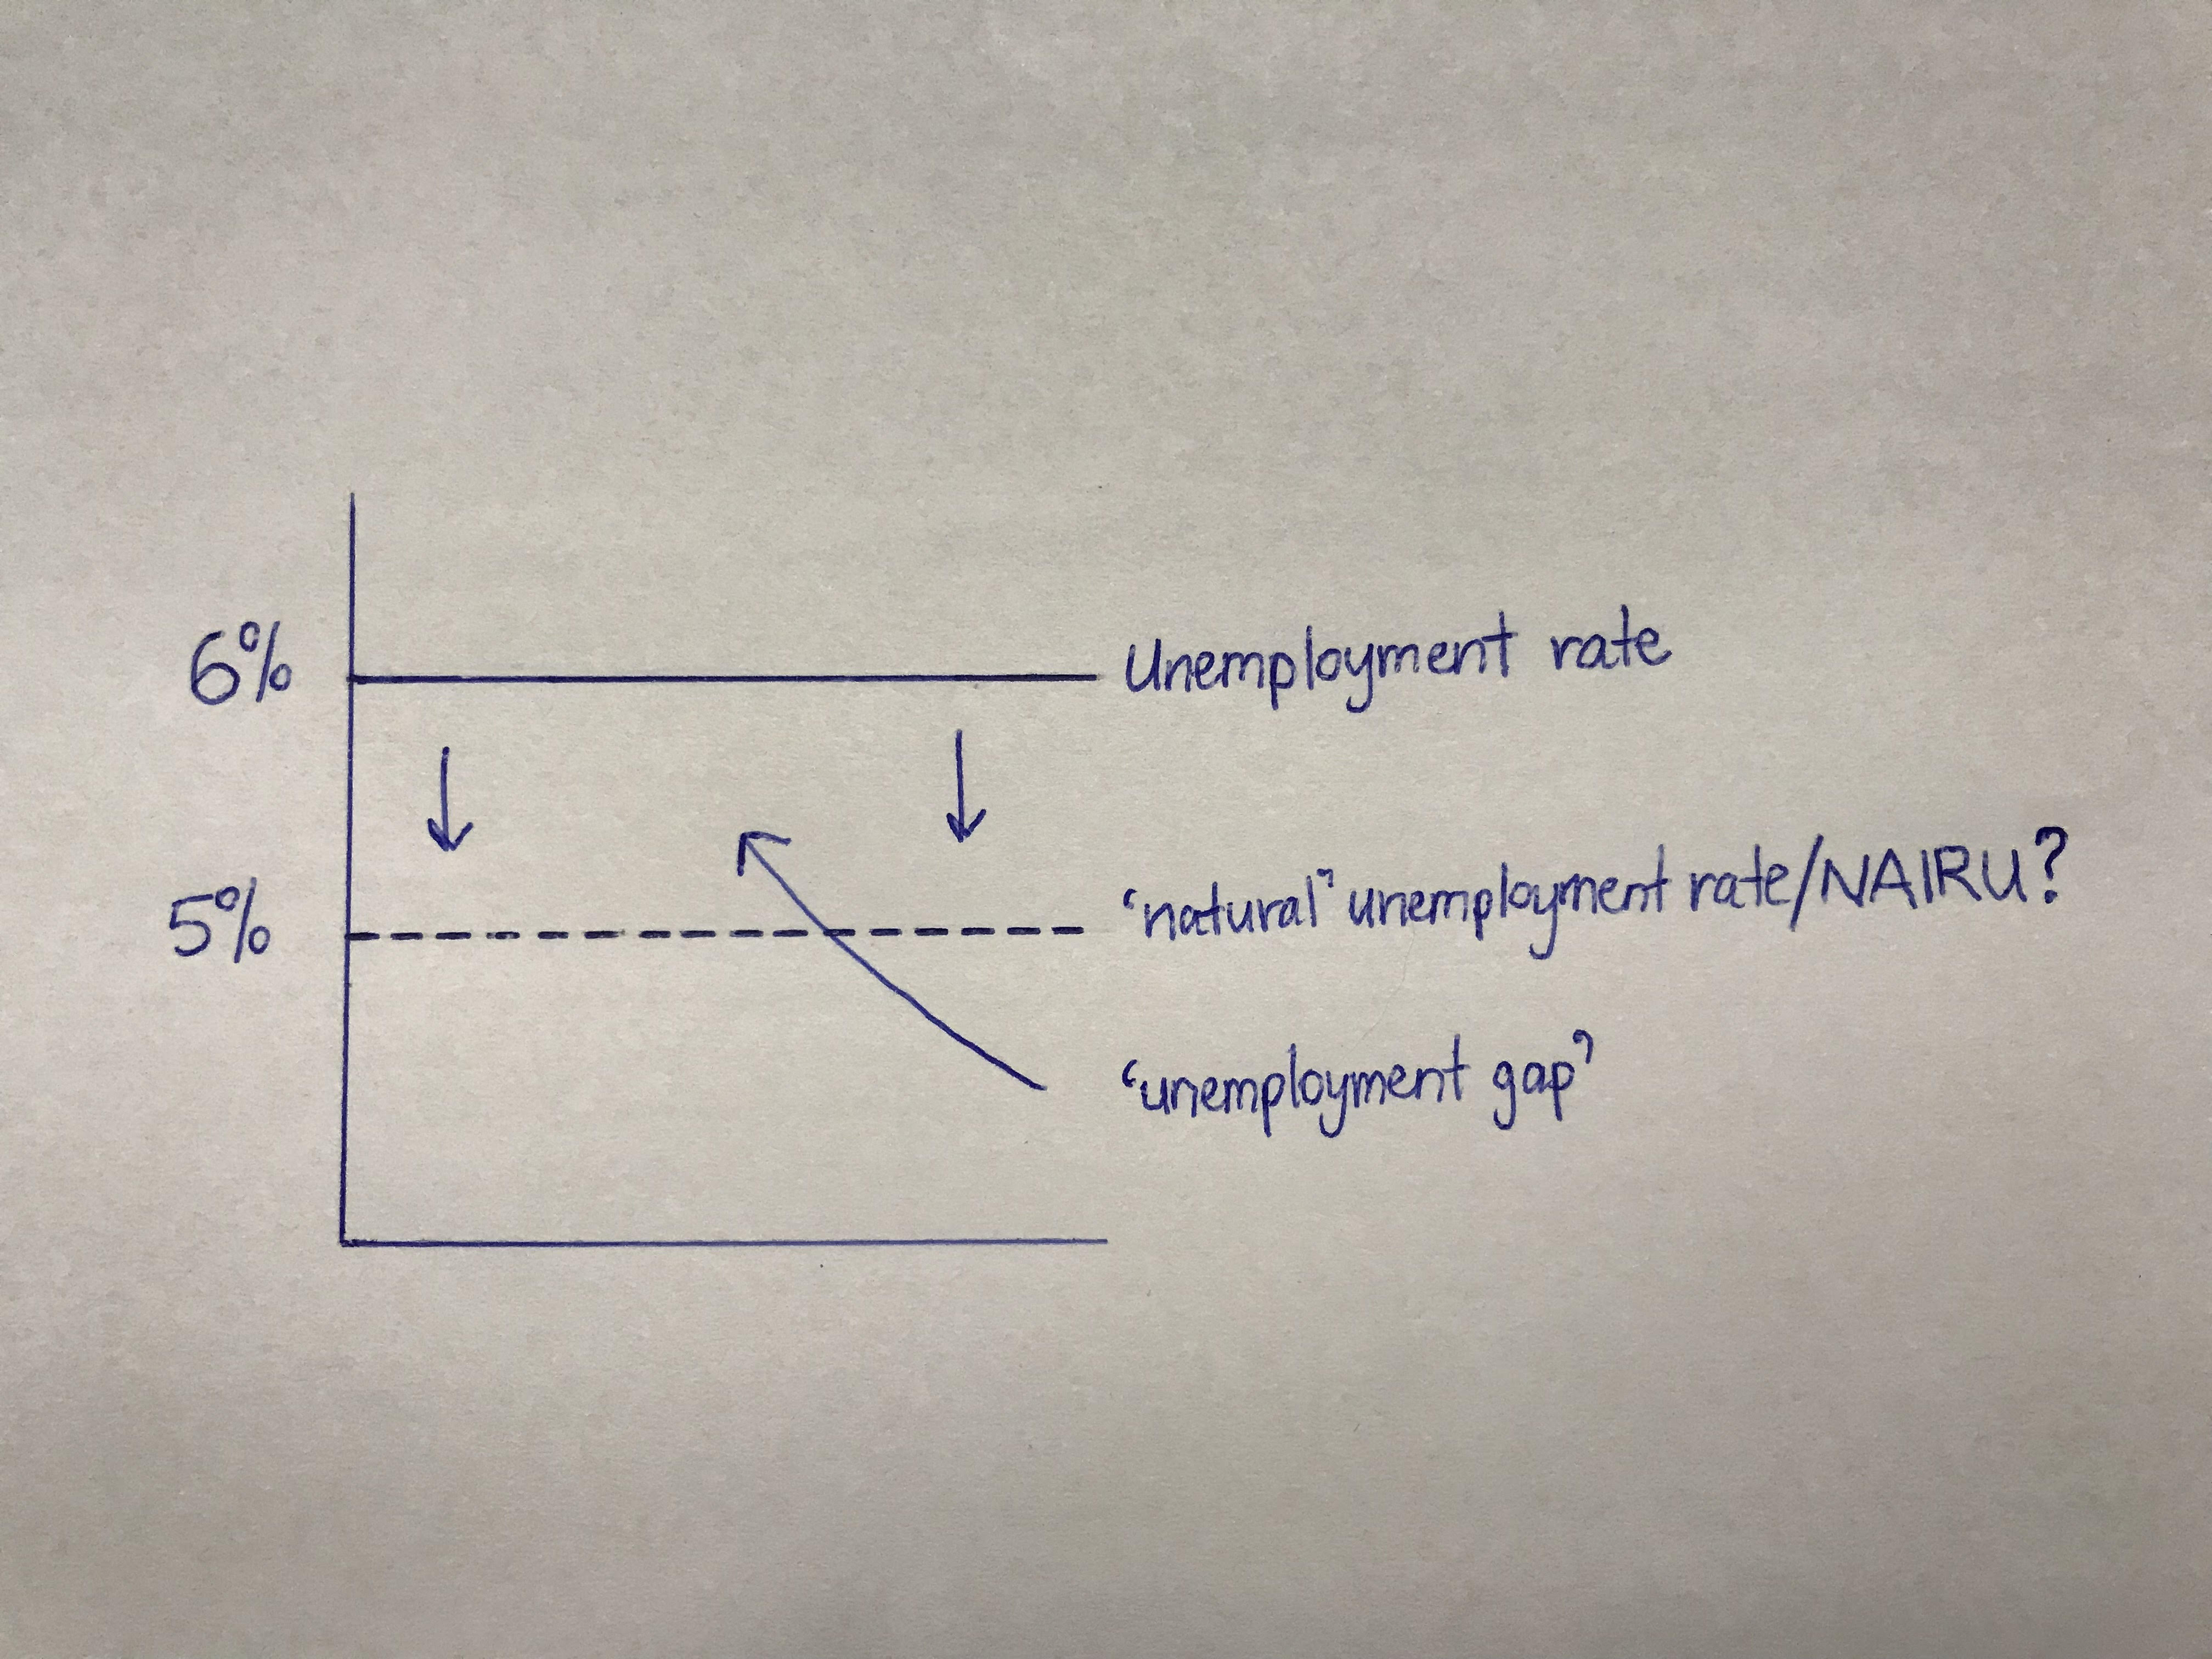 A graph showing the gap between the true unemployment rate and the desired "natural" unemployment rate.